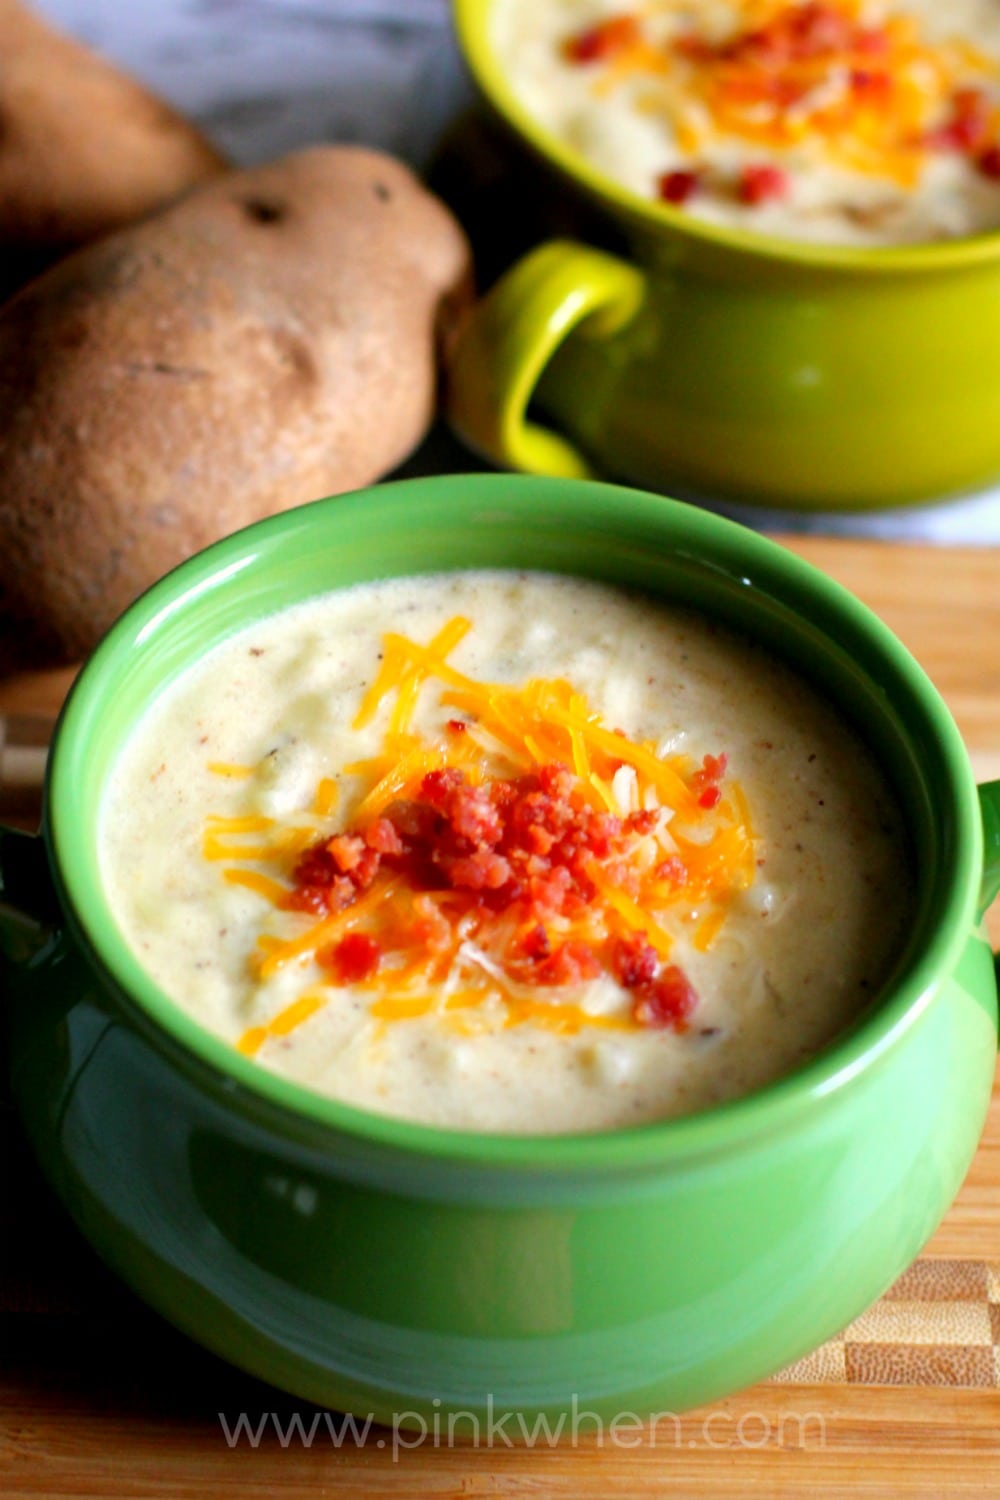 This is the Ultimate Slow Cooker Potato Soup Recipe! It's creamy, delicious, and can be made without flour! Learn the tips and tricks for making the best creamy potato soup recipe ever. #slowcooker #slowcookerpotatosoup #potatosoup